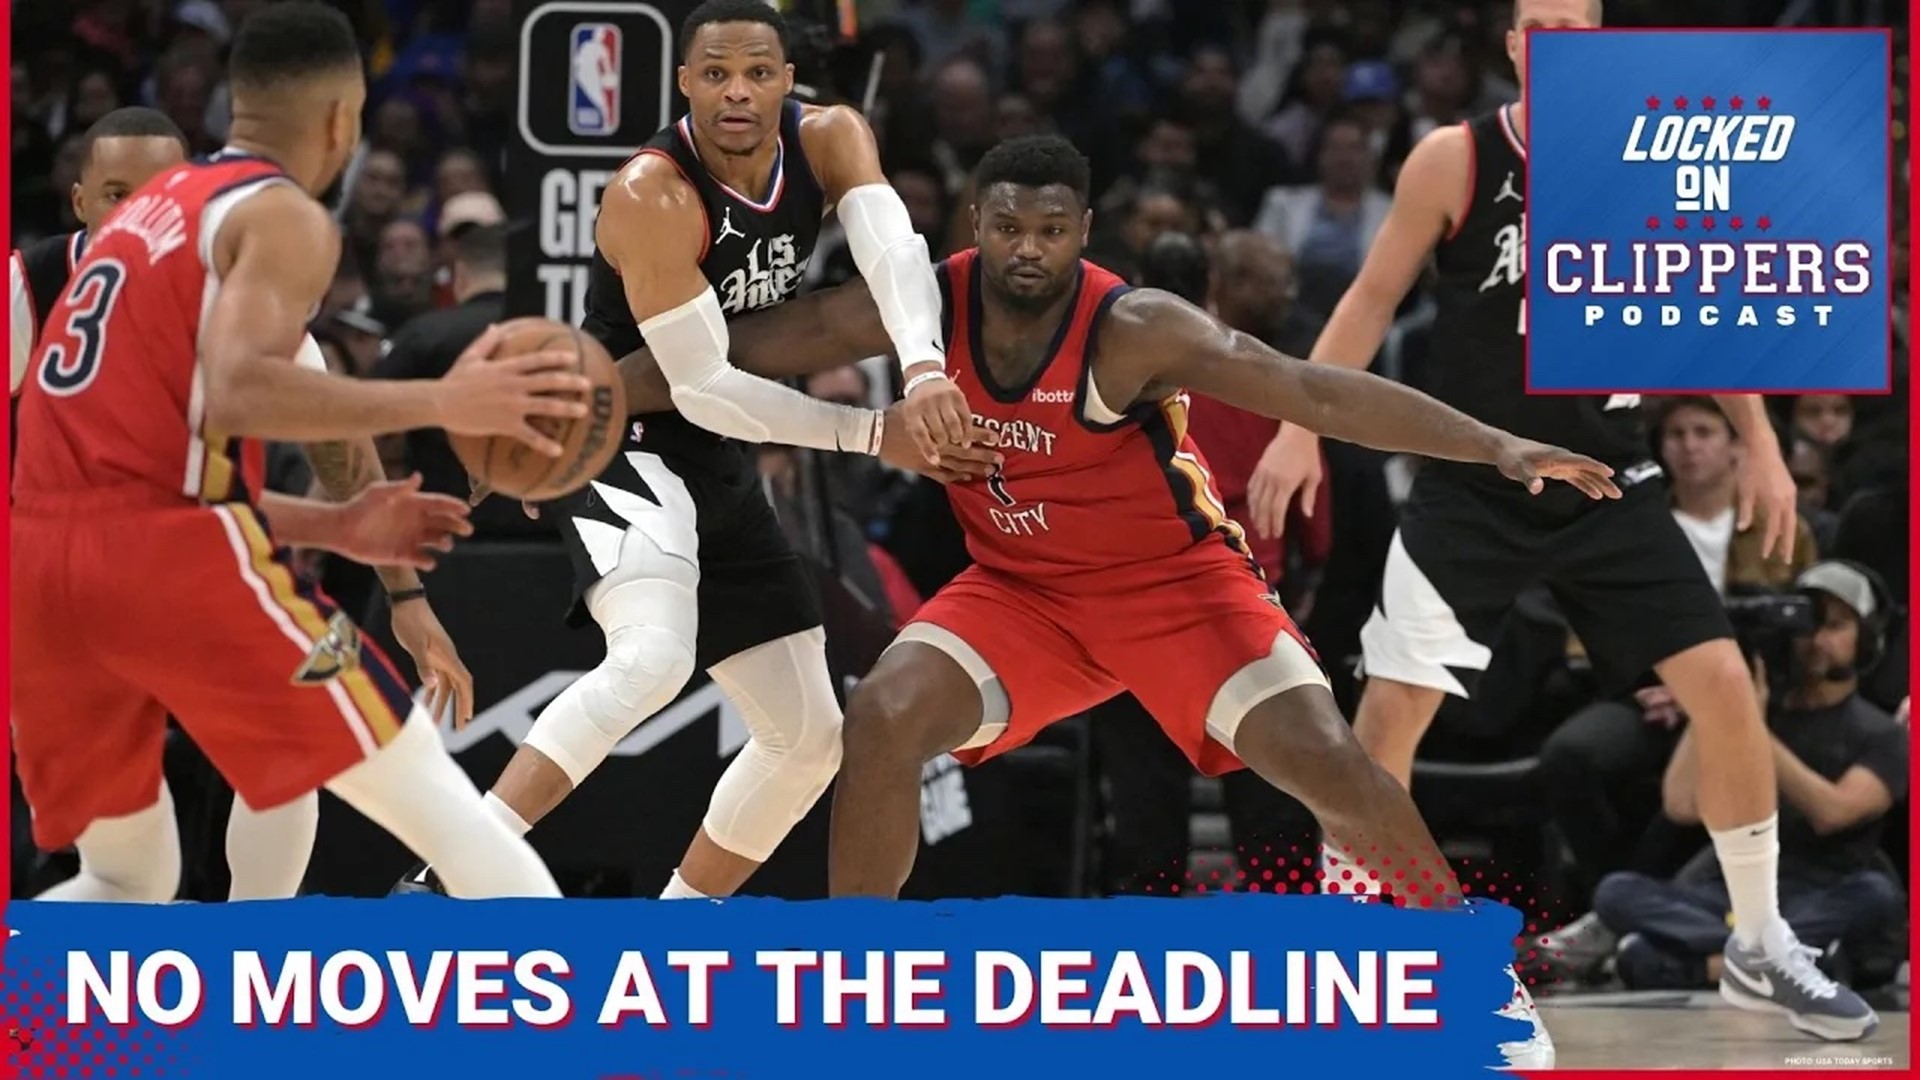 The LA Clippers made no moves at the trade deadline on Thursday, indicating that they felt good about their team as is. Should they have made a move?